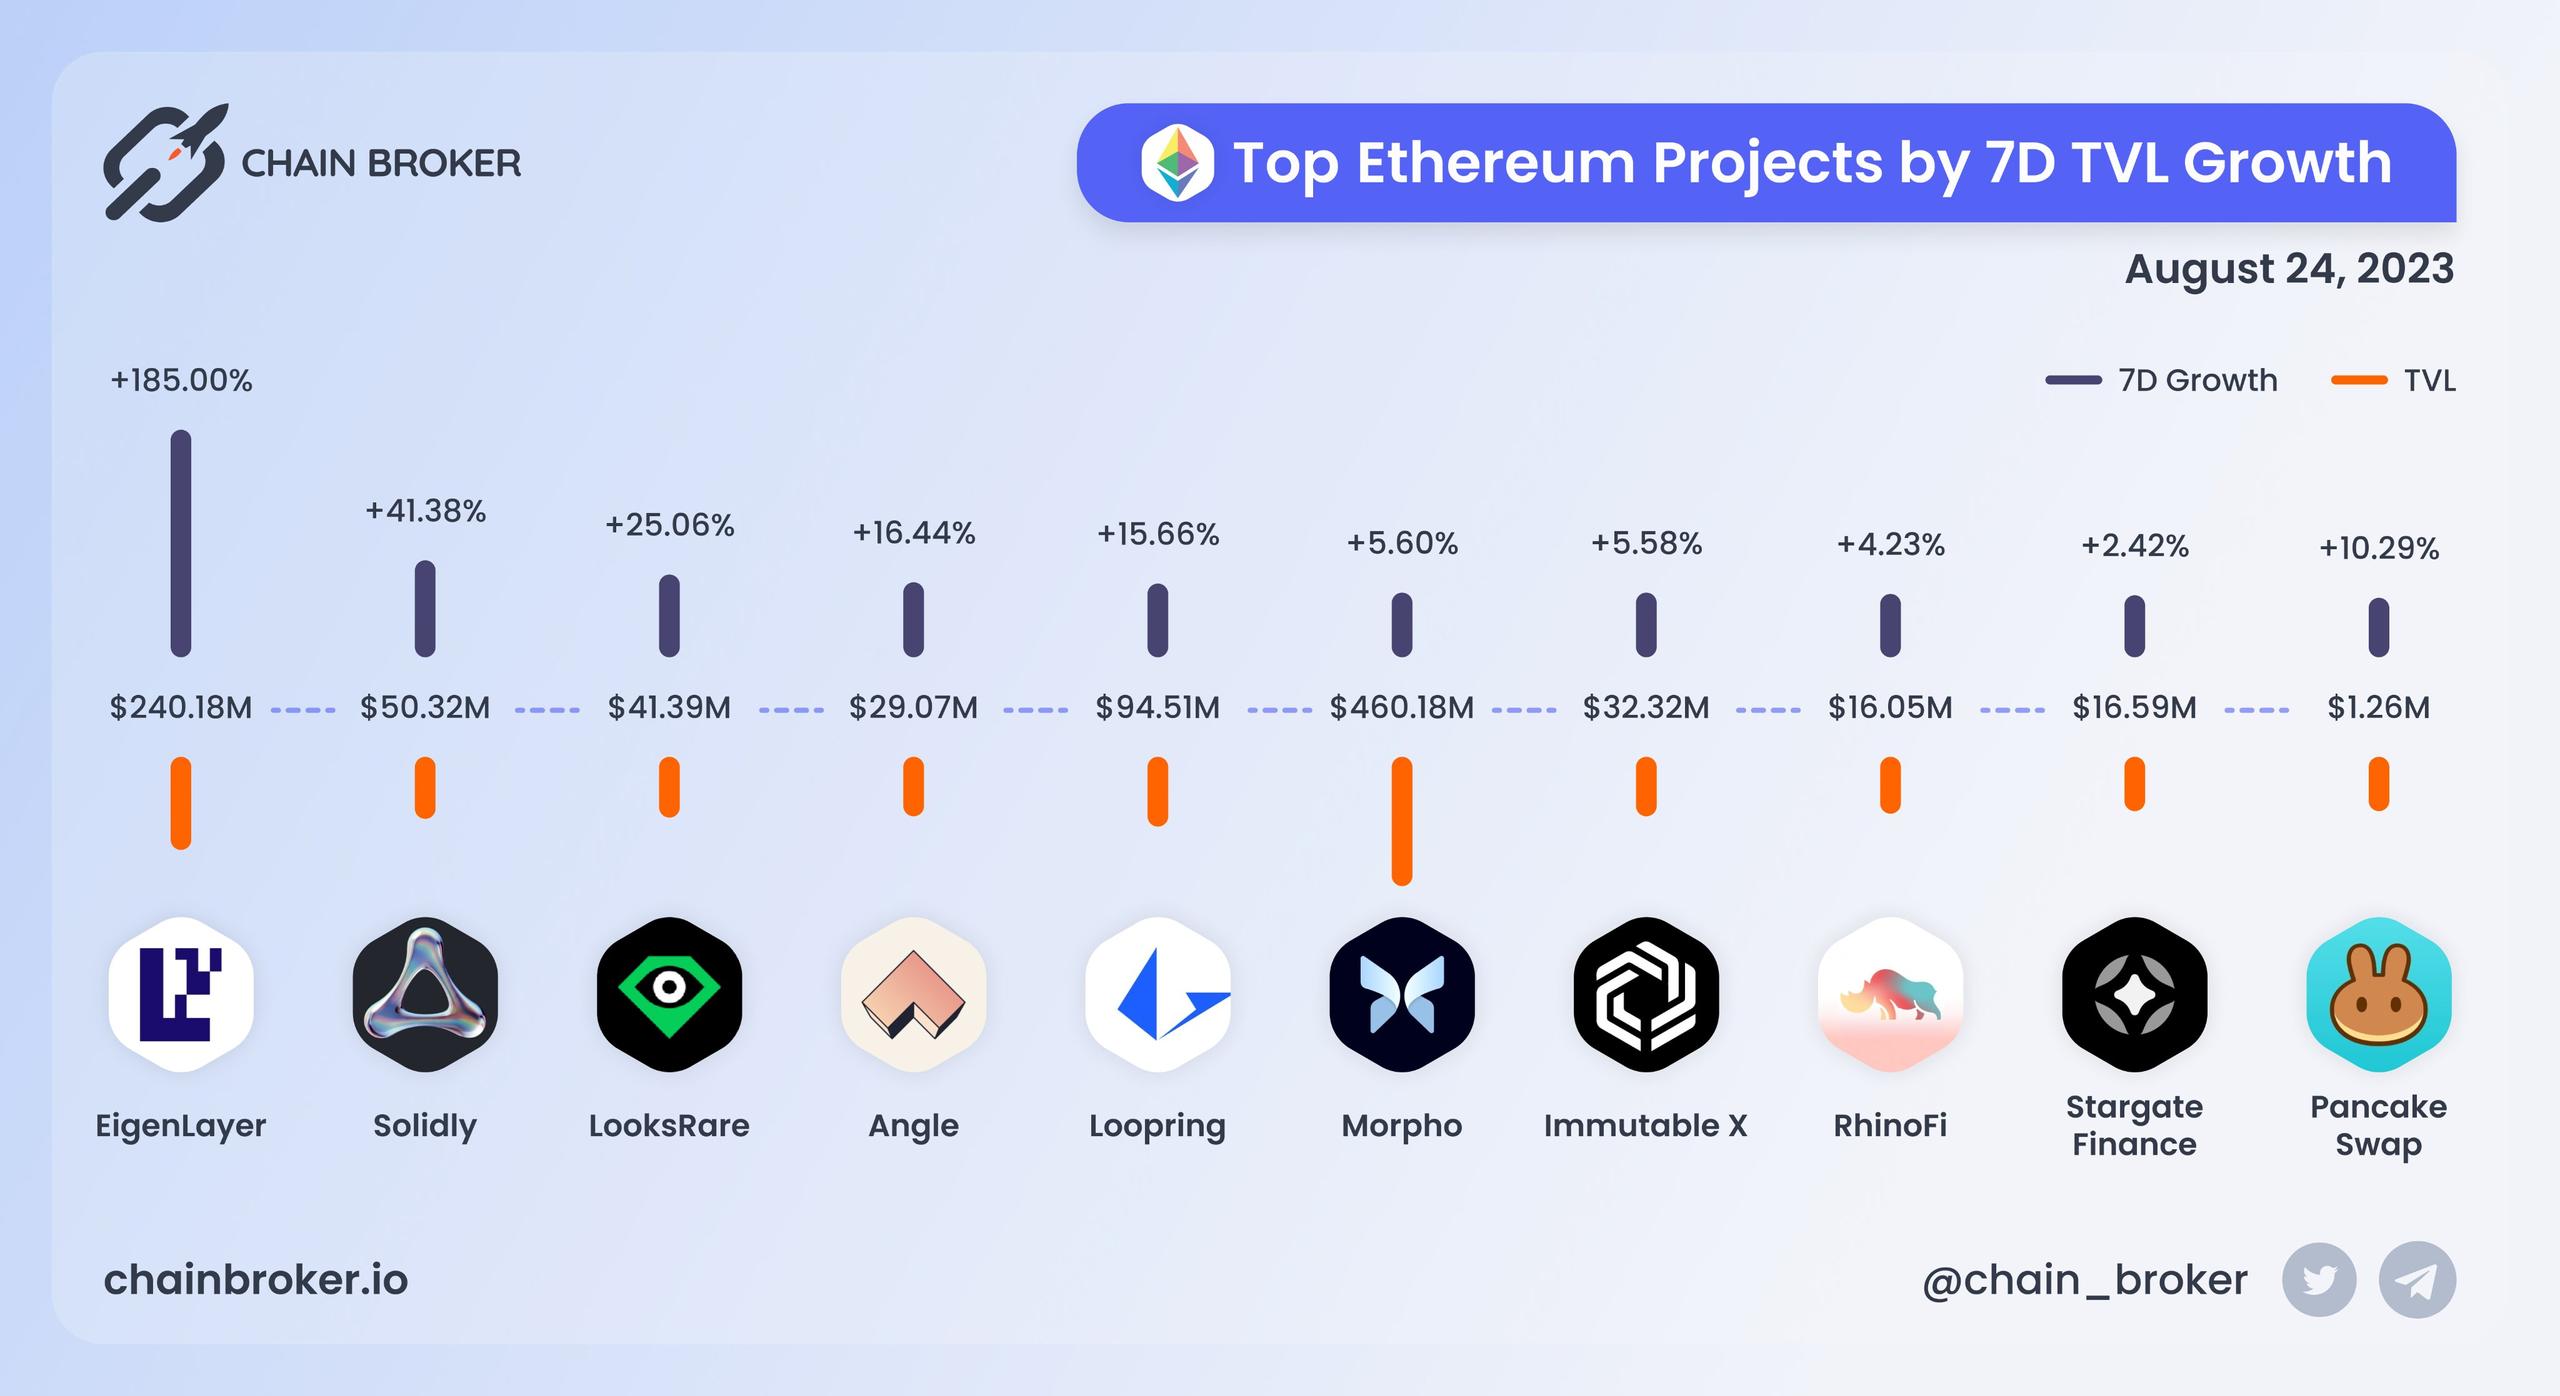 Top Ethereum projects by 7D TVL growth